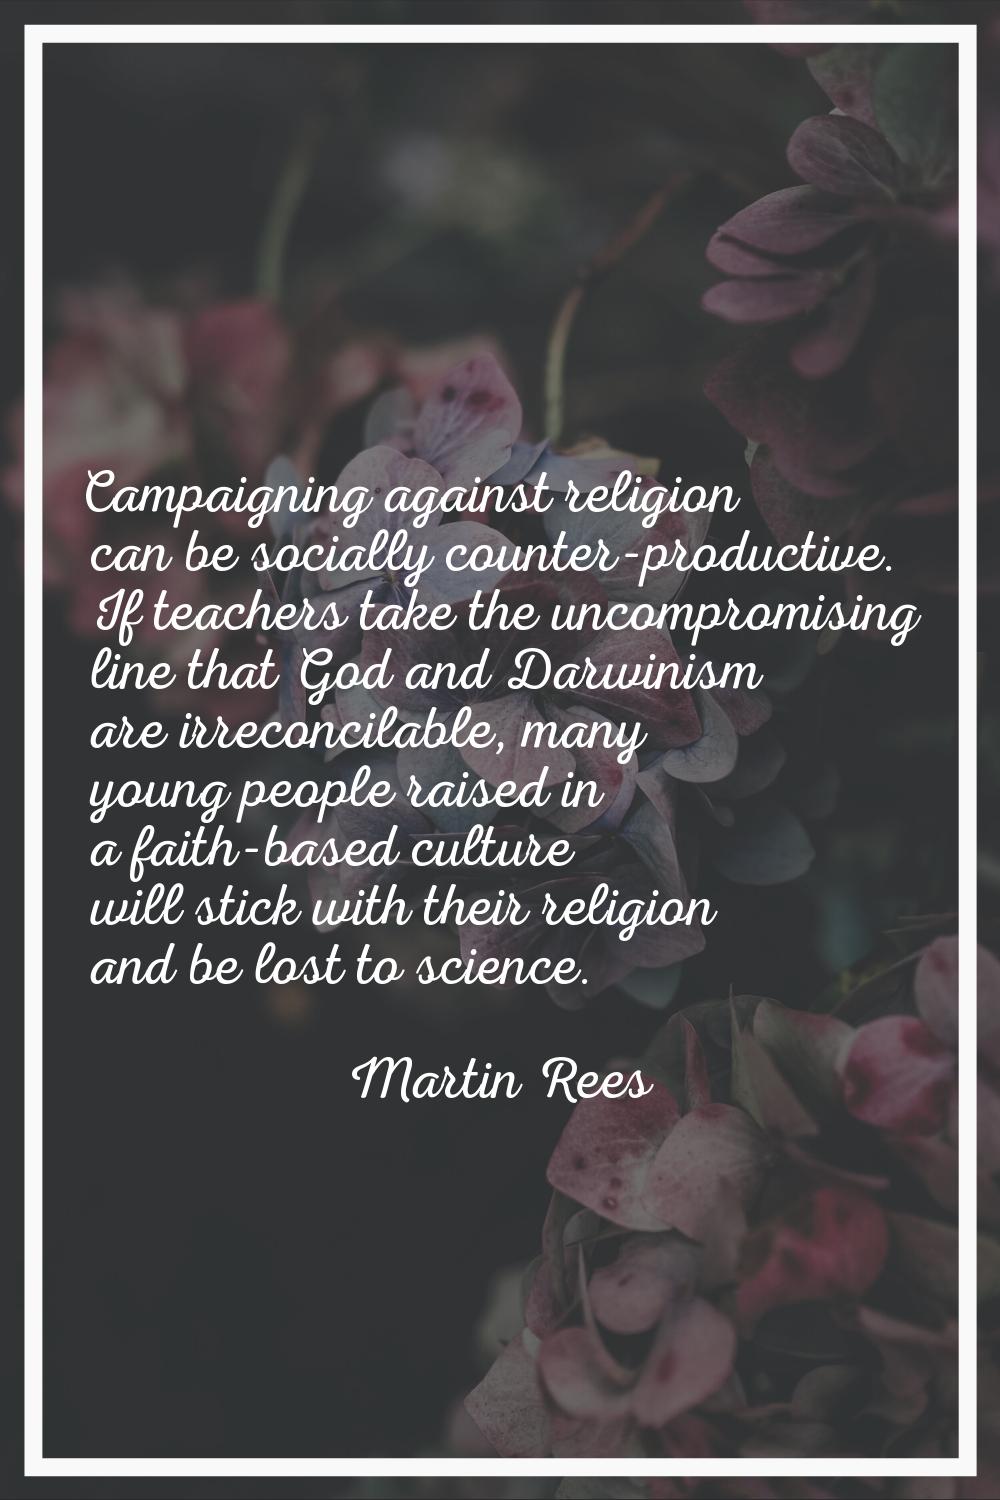 Campaigning against religion can be socially counter-productive. If teachers take the uncompromisin